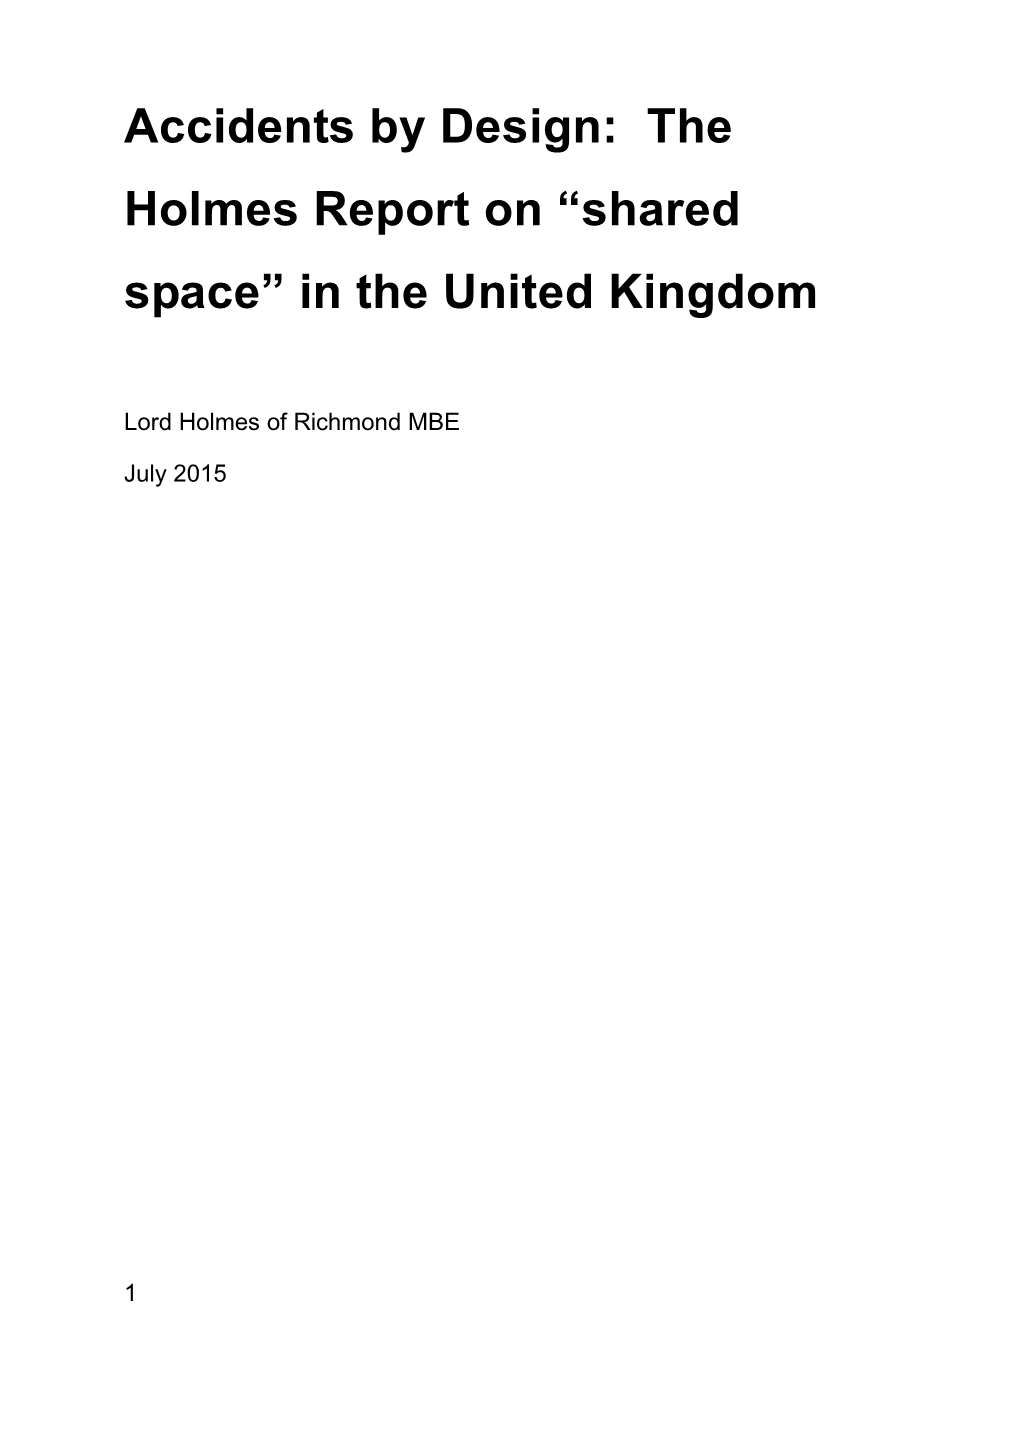 Accidents by Design: the Holmes Report on “Shared Space” in the United Kingdom